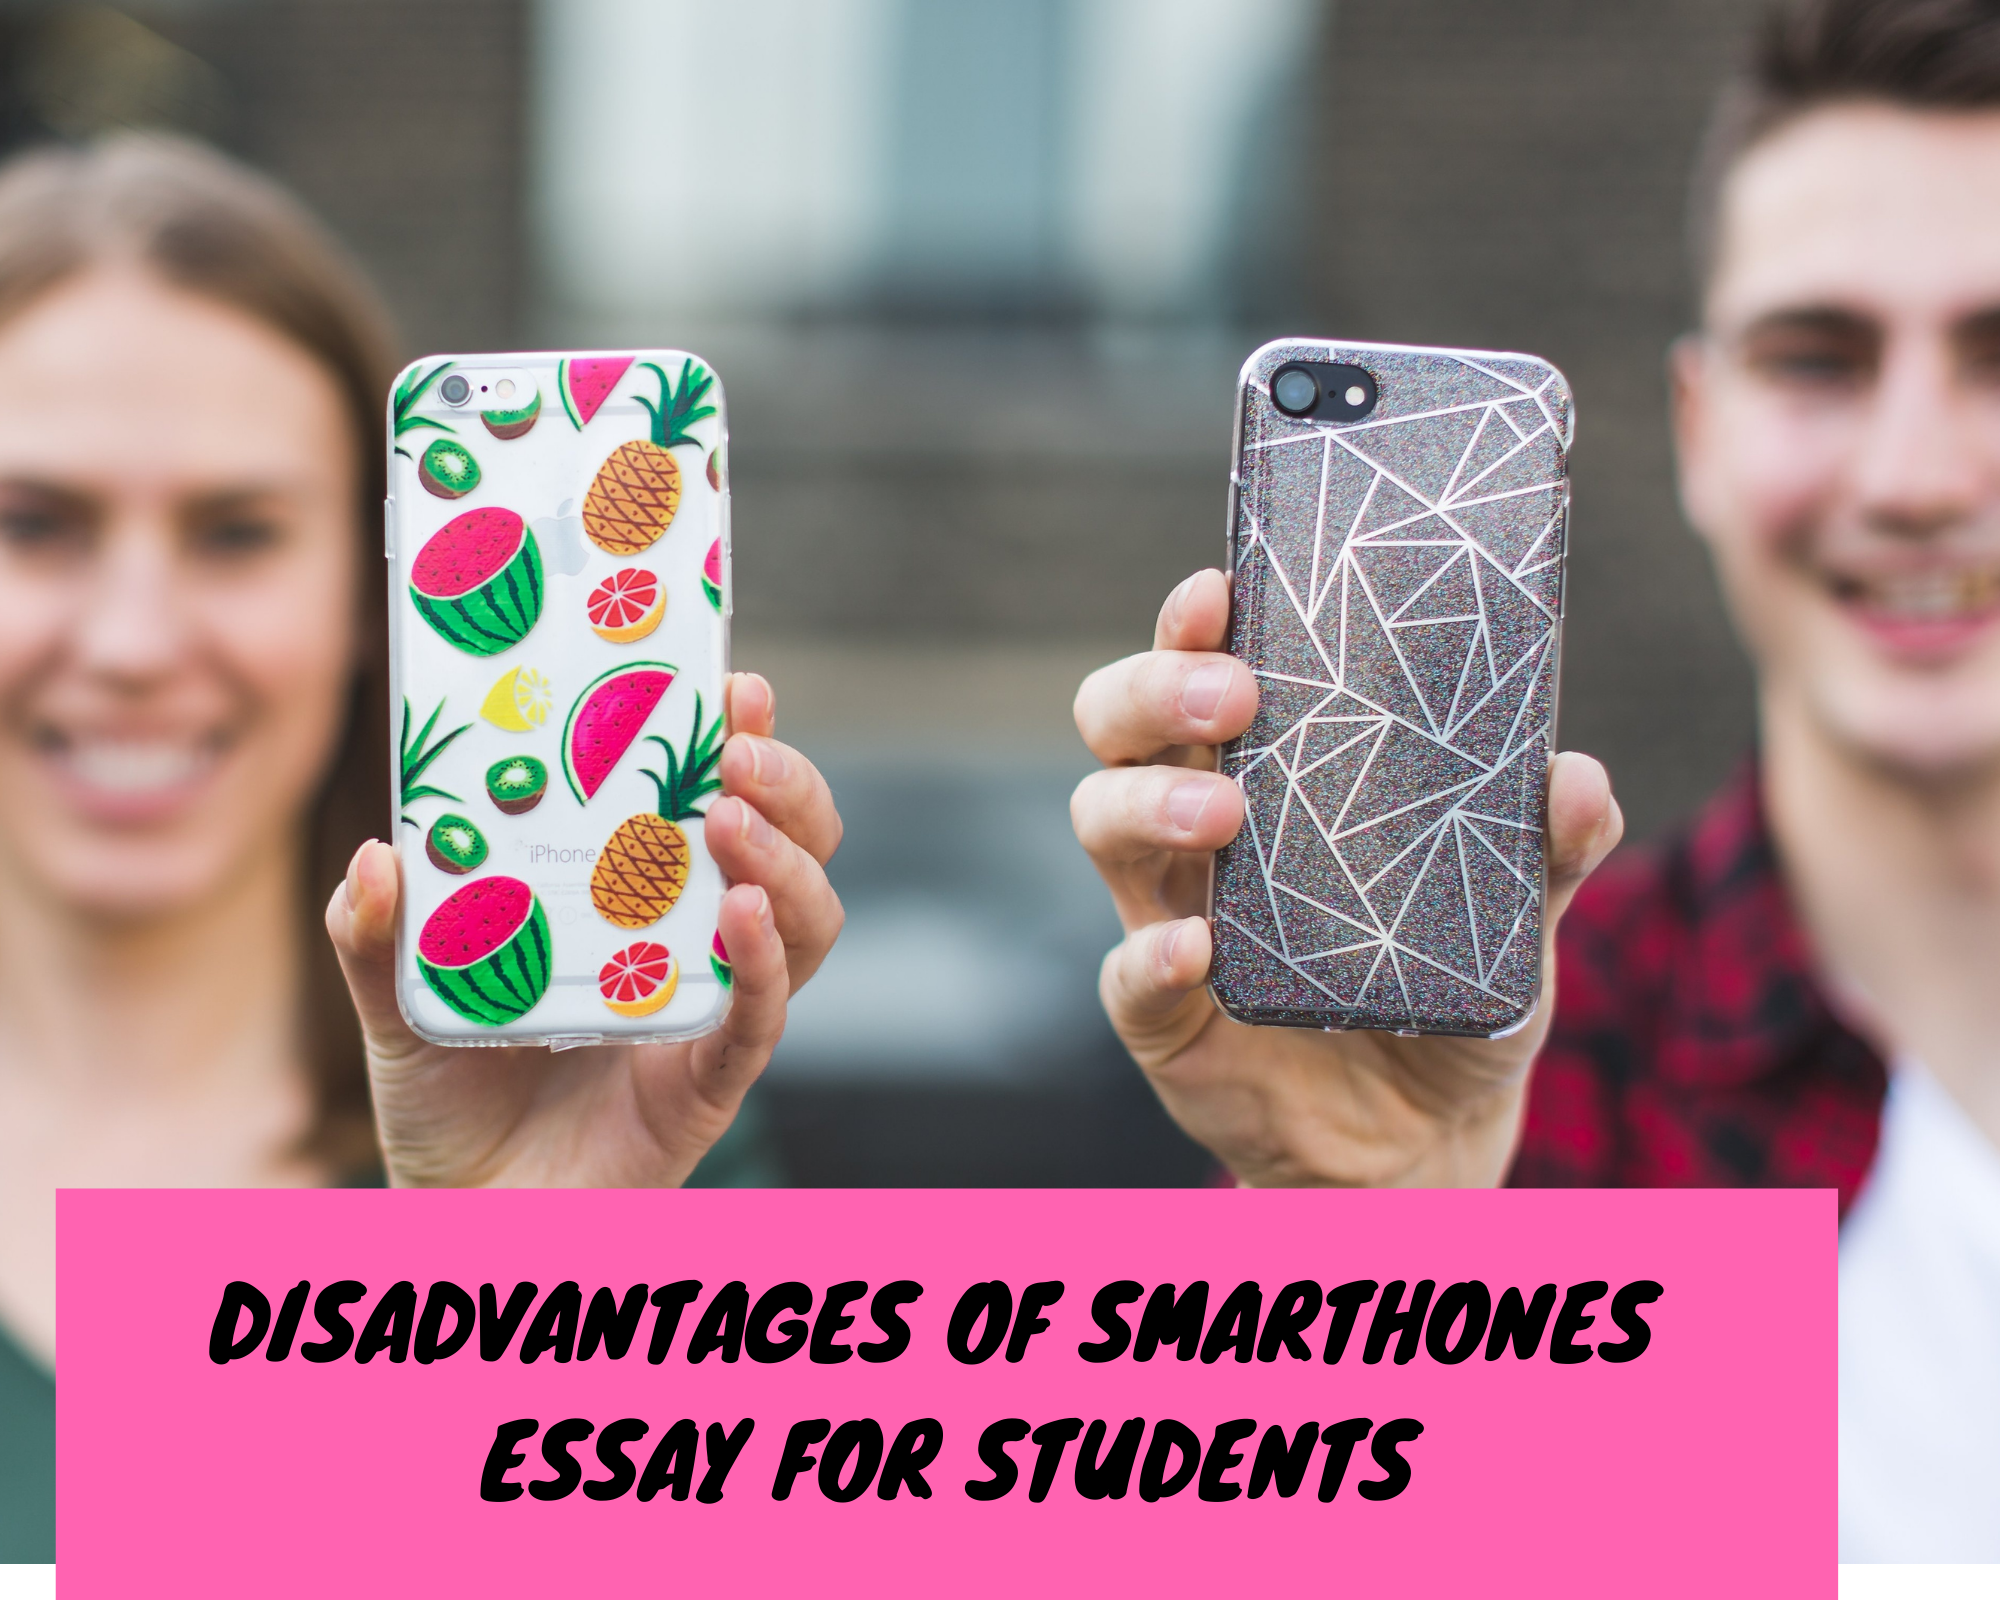 Essay on disadvantages of smartphones for students